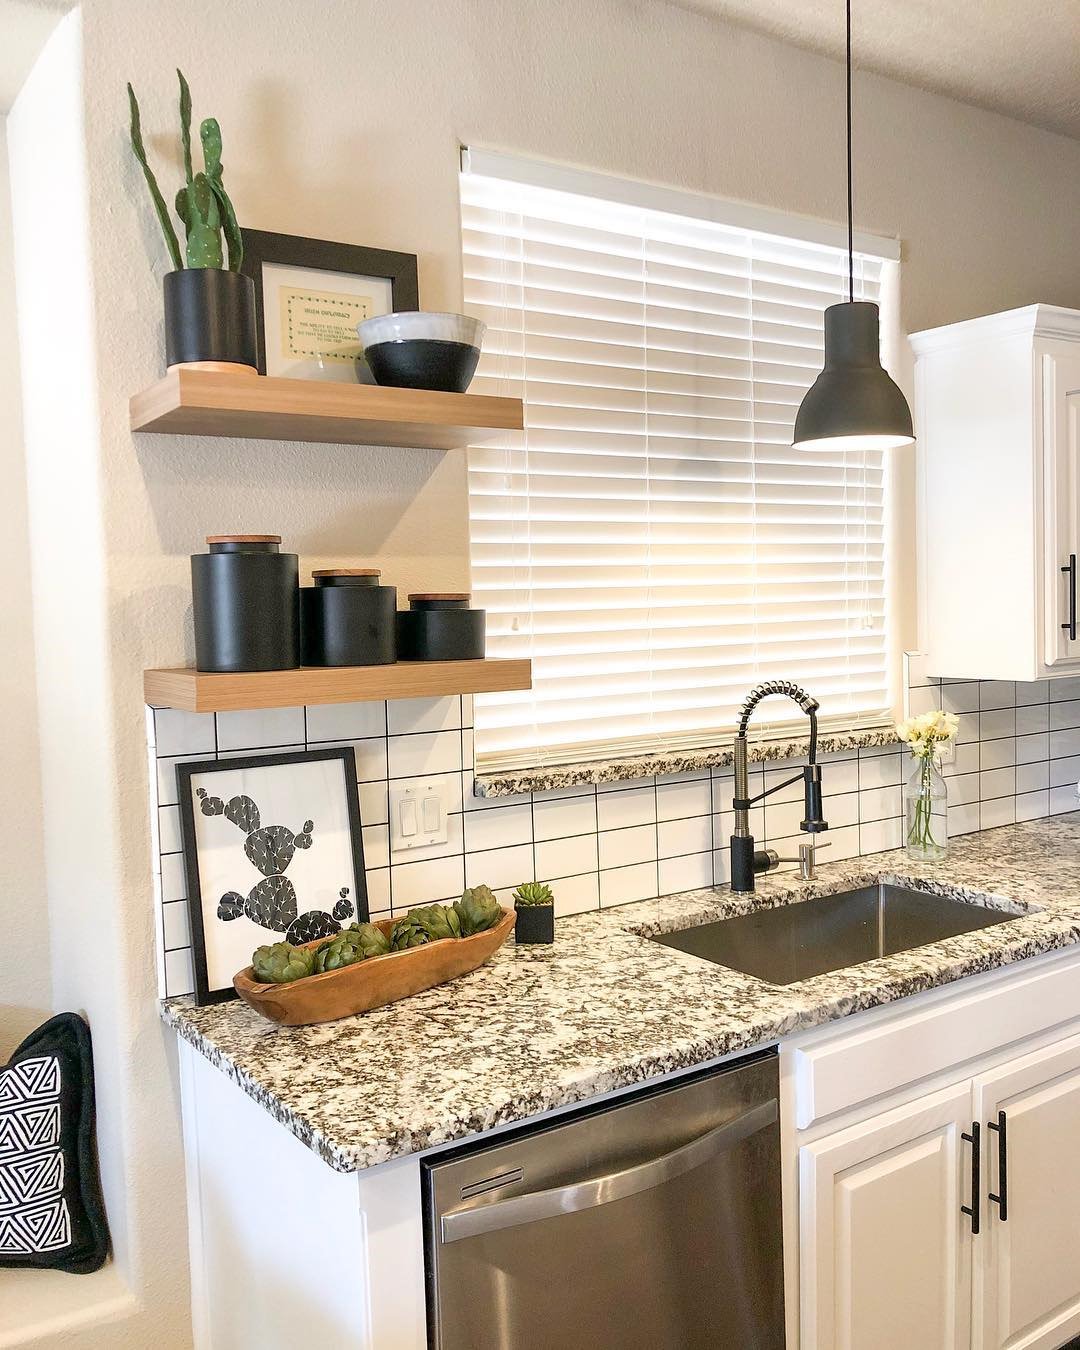 Arizona Tile On Twitter On The Hunt For The Perfect Granite Come To Arizona Tiles Slabyard This Picture Features Whisper White Granite Paired With Classic White Subwaytile Donttakemeforgranite Photo Credit House Of